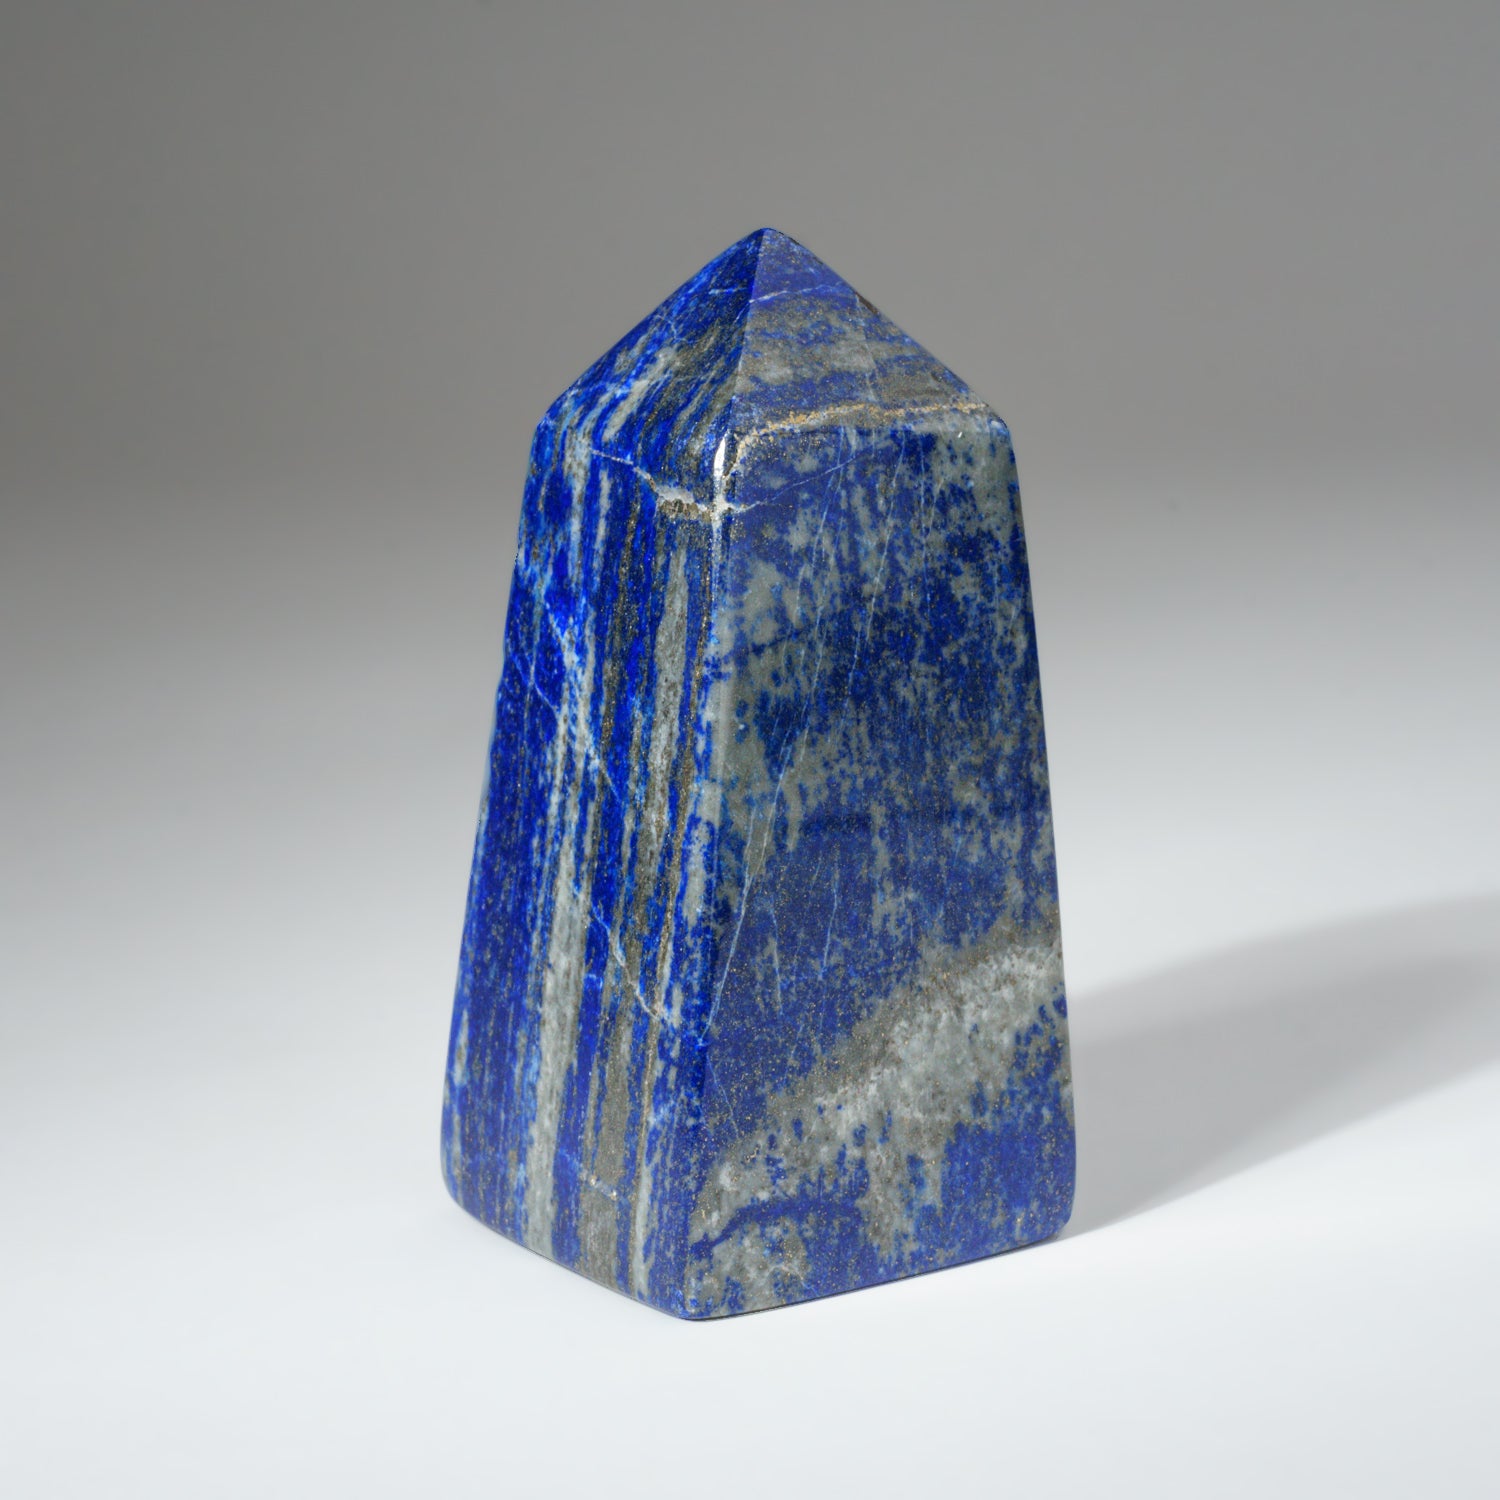 Polished Lapis Lazuli Point from Afghanistan (320 grams)